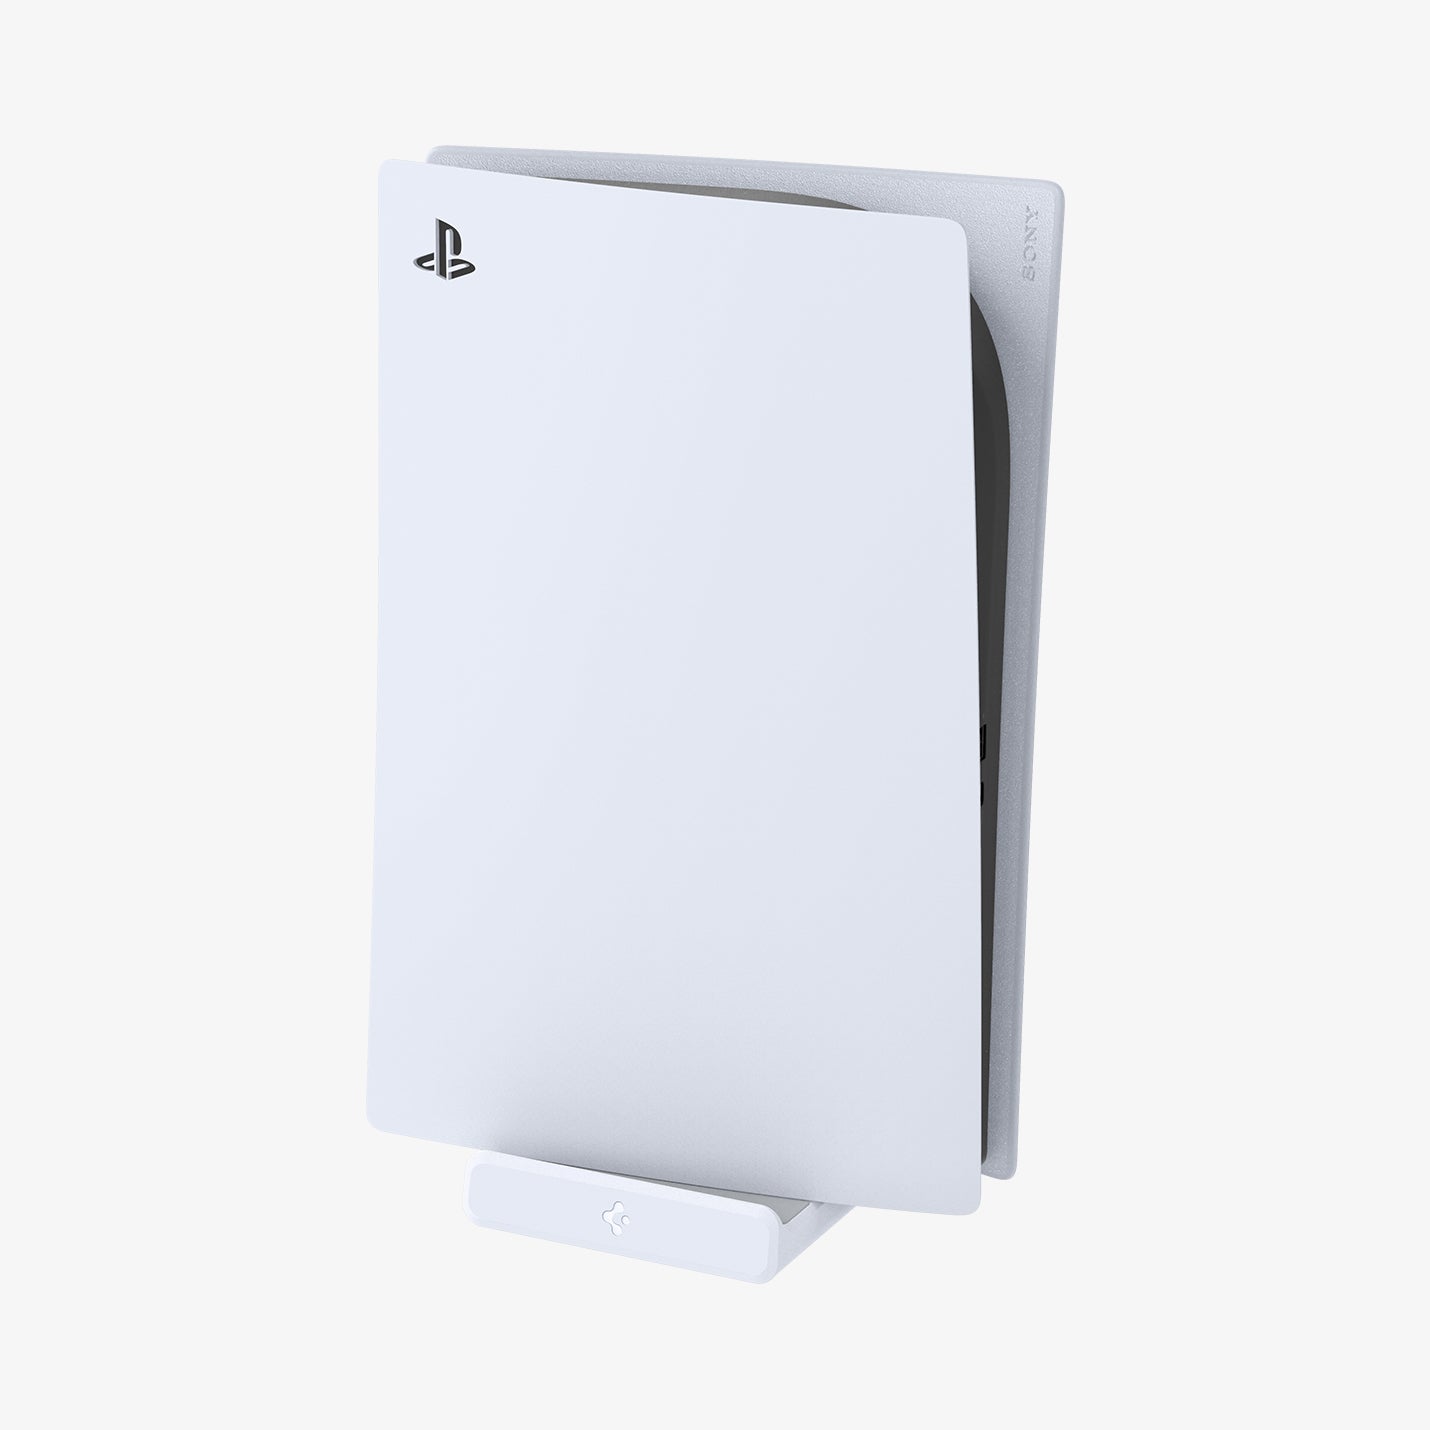 AMP06396 - Playstation 5 Console Mount | VG200 in white showing the front and partial side with PS5 attached